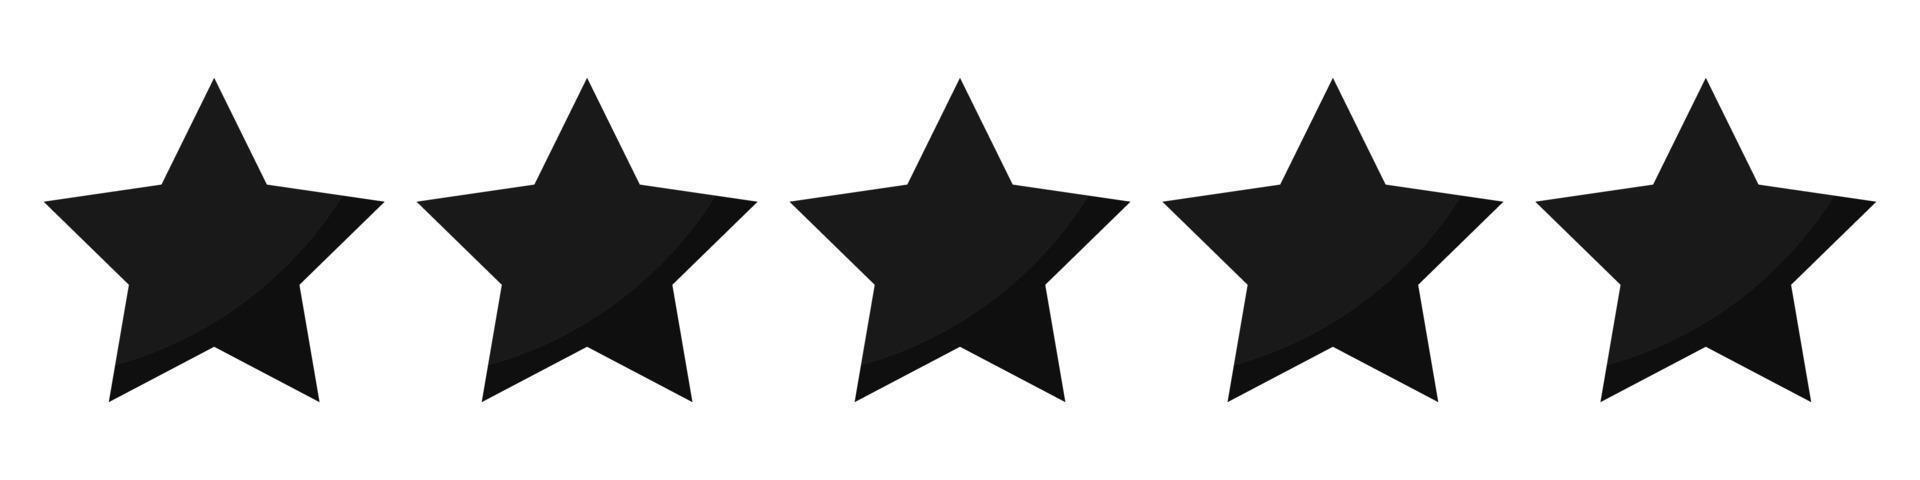 Five stars quality rating icons. 5 stars icon. Five star sign. Rating symbol. Vector illustration